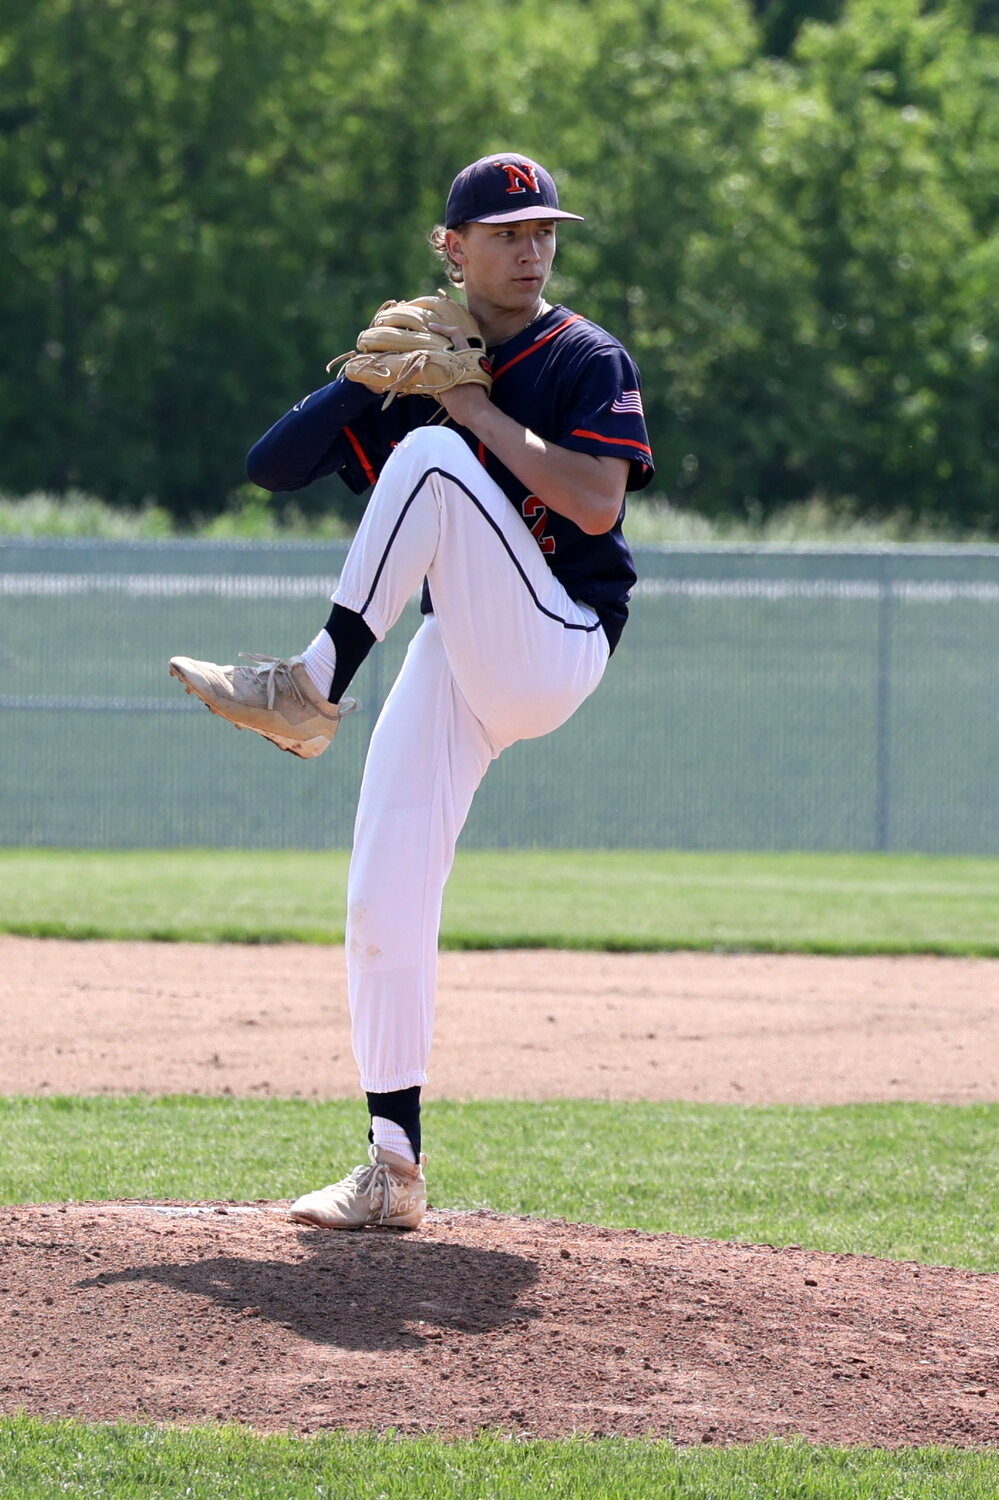 Roman Utterback picked up the win on the mound for the Chargers going four innings in relief.